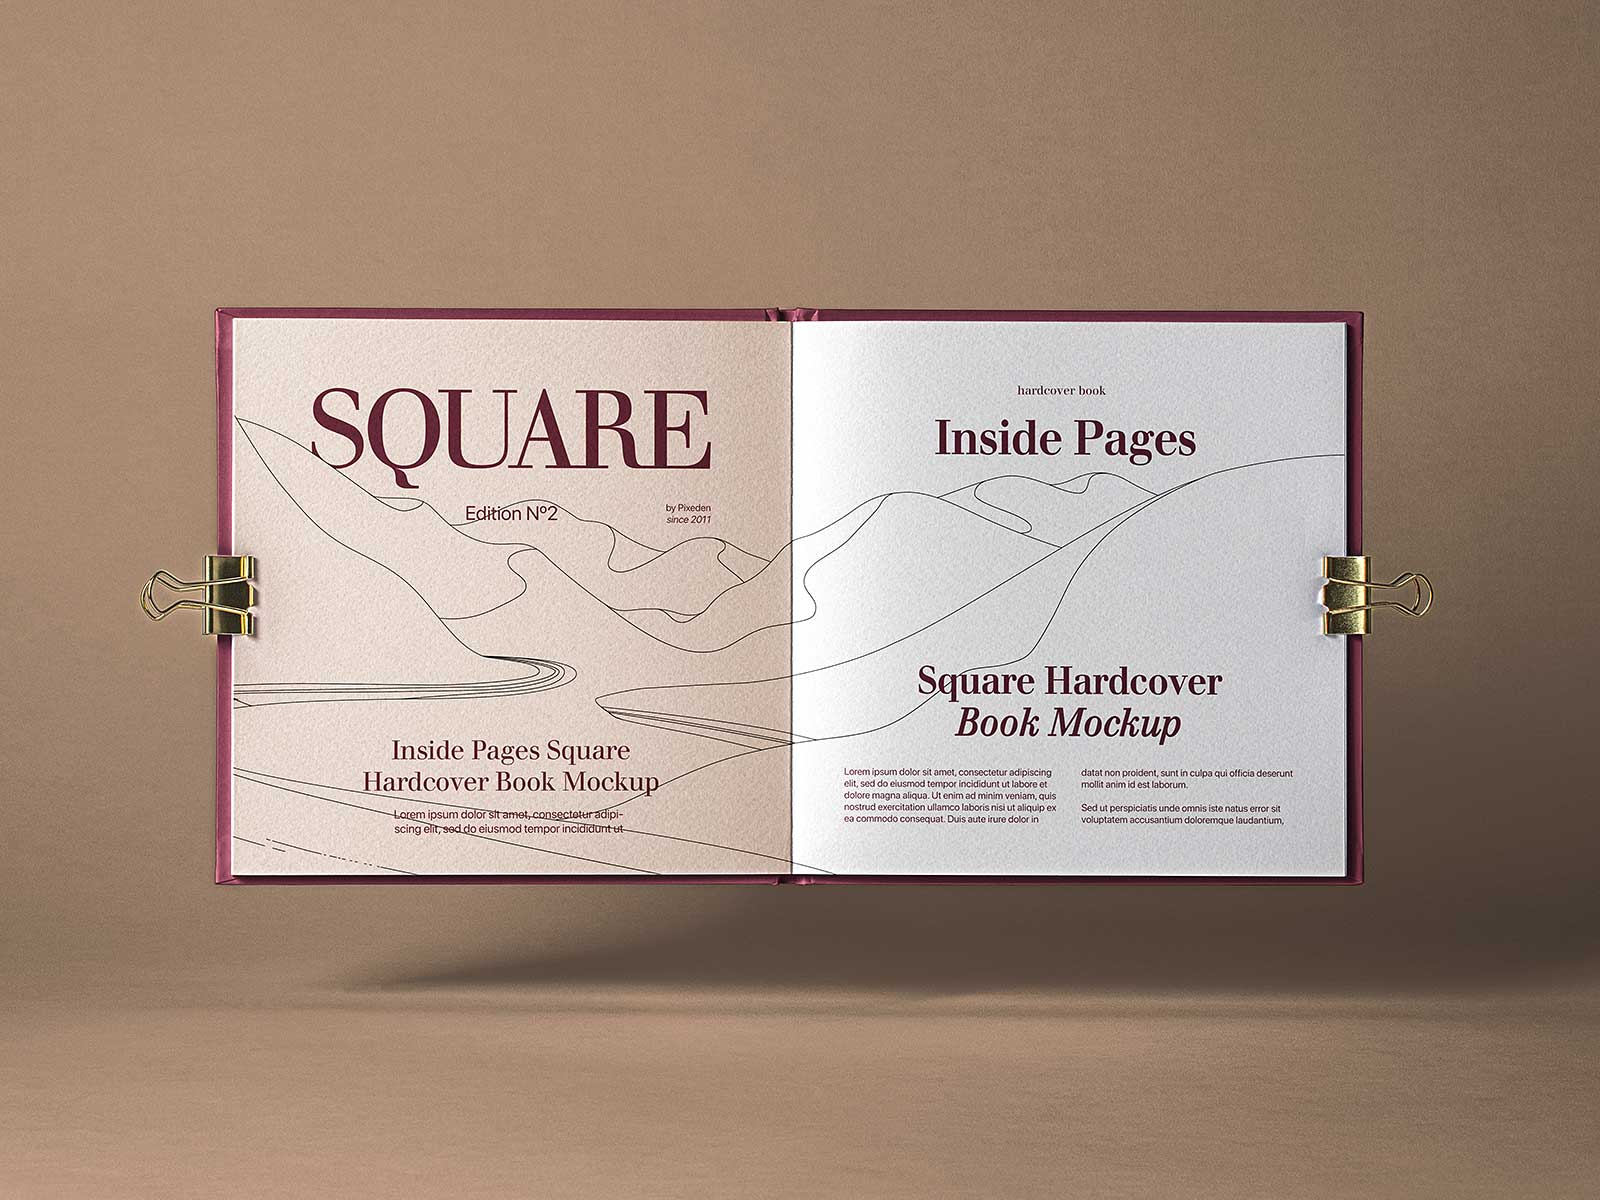 Open Square Book Free Mockup with Binder Clips